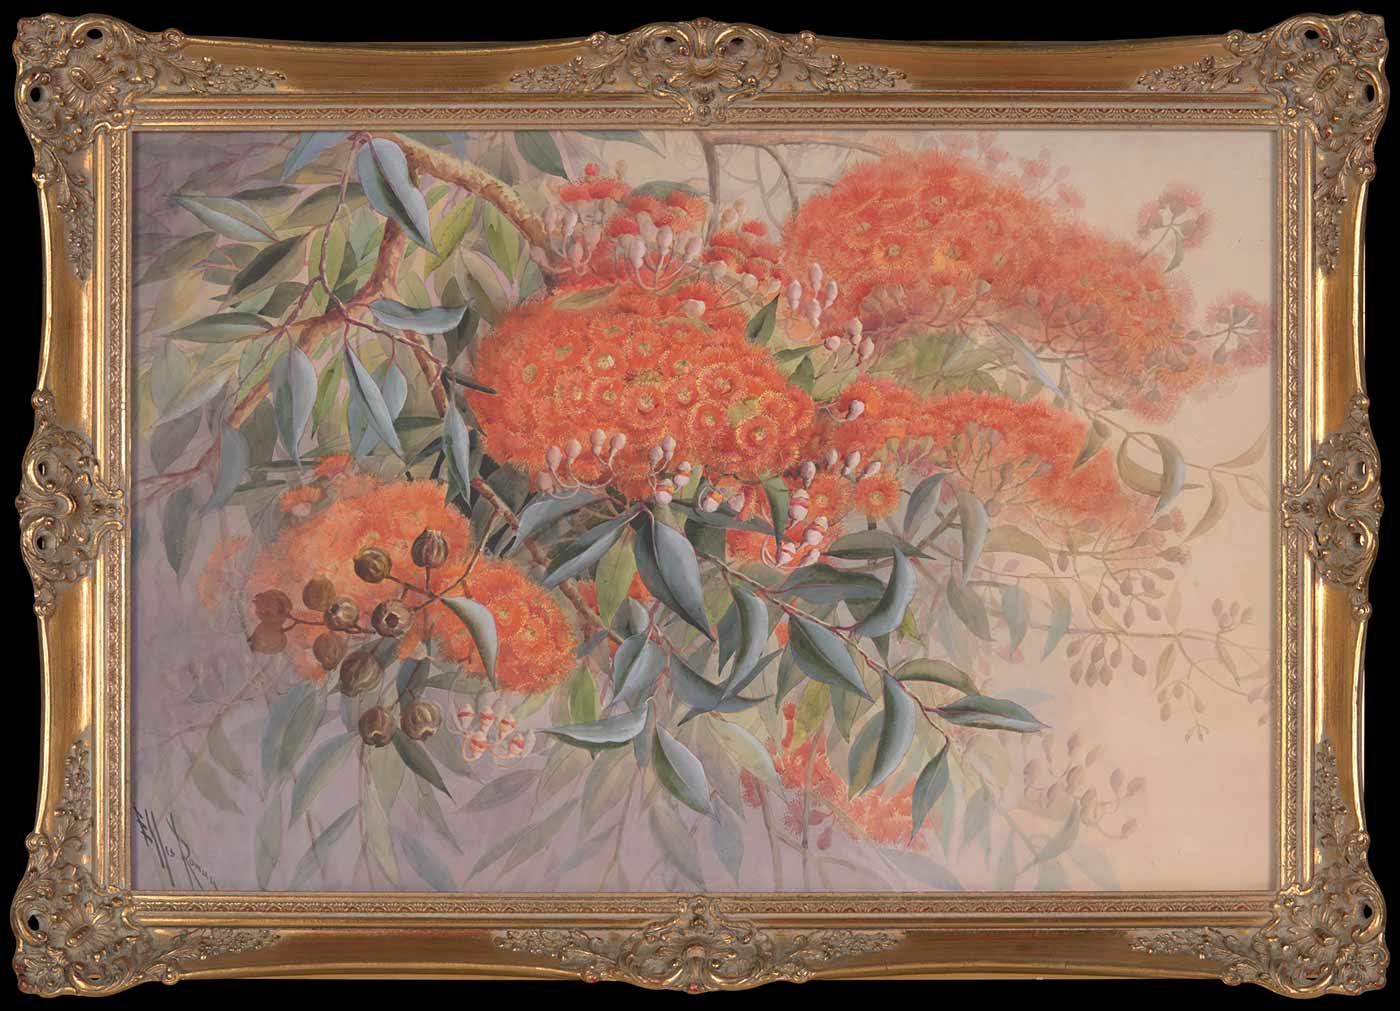 A large water colour of vivid flowering orange blossoms contrasting on a branch with silvery gum leaves and gumnuts. Ornate gilt frame. Marks/inscriptions: Signed Ellis Rowan bottom left hand corner.